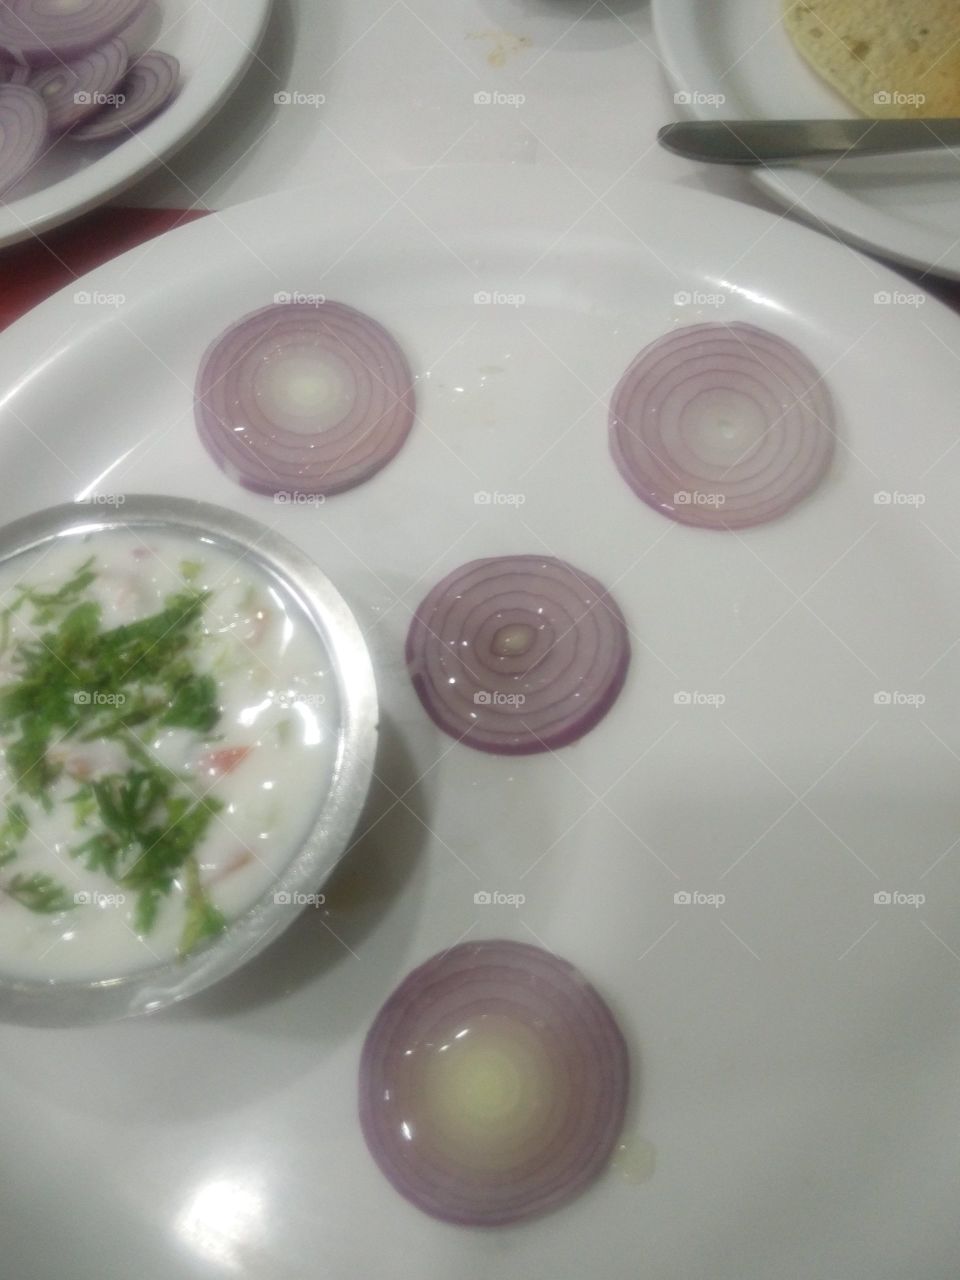 onion and salad waiting for food...😂